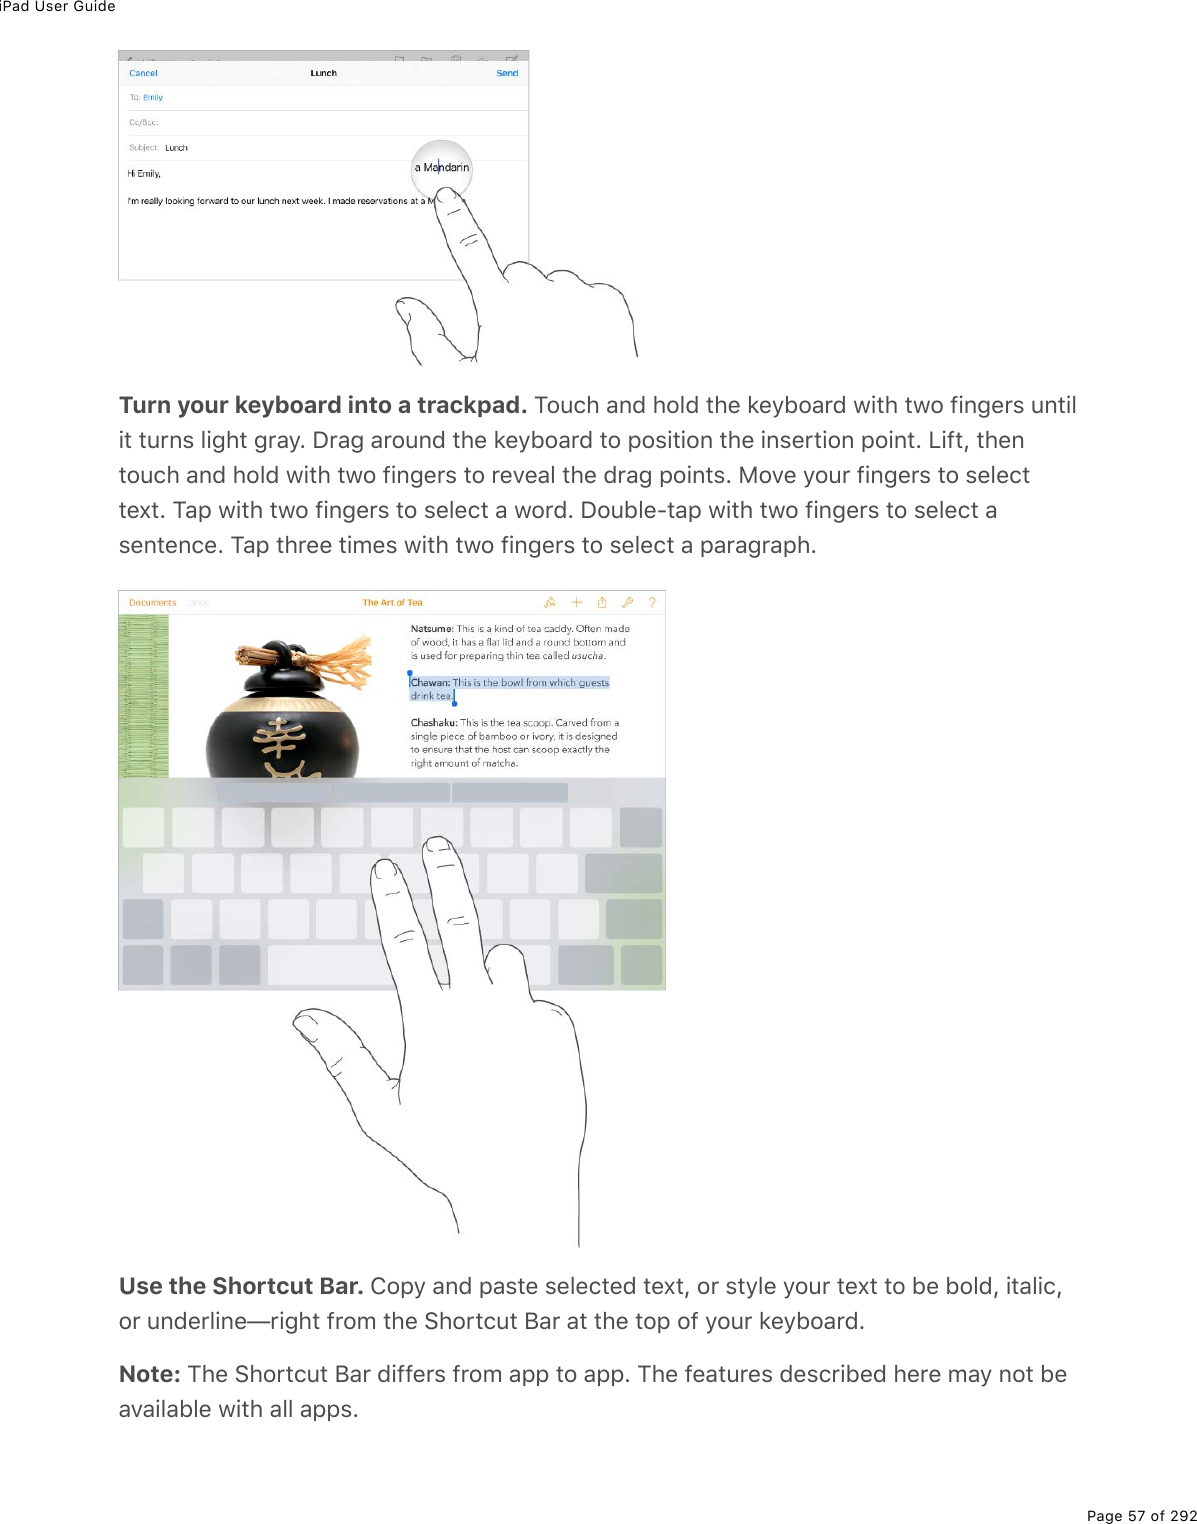 iPad User GuidePage 57 of 292Turn your keyboard into a trackpad. Touch and hold the keyboard with two fingers untilit turns light gray. Drag around the keyboard to position the insertion point. Lift, thentouch and hold with two fingers to reveal the drag points. Move your fingers to selecttext. Tap with two fingers to select a word. Double-tap with two fingers to select asentence. Tap three times with two fingers to select a paragraph.Use the Shortcut Bar. Copy and paste selected text, or style your text to be bold, italic,or underline—right from the Shortcut Bar at the top of your keyboard.Note: The Shortcut Bar differs from app to app. The features described here may not beavailable with all apps.